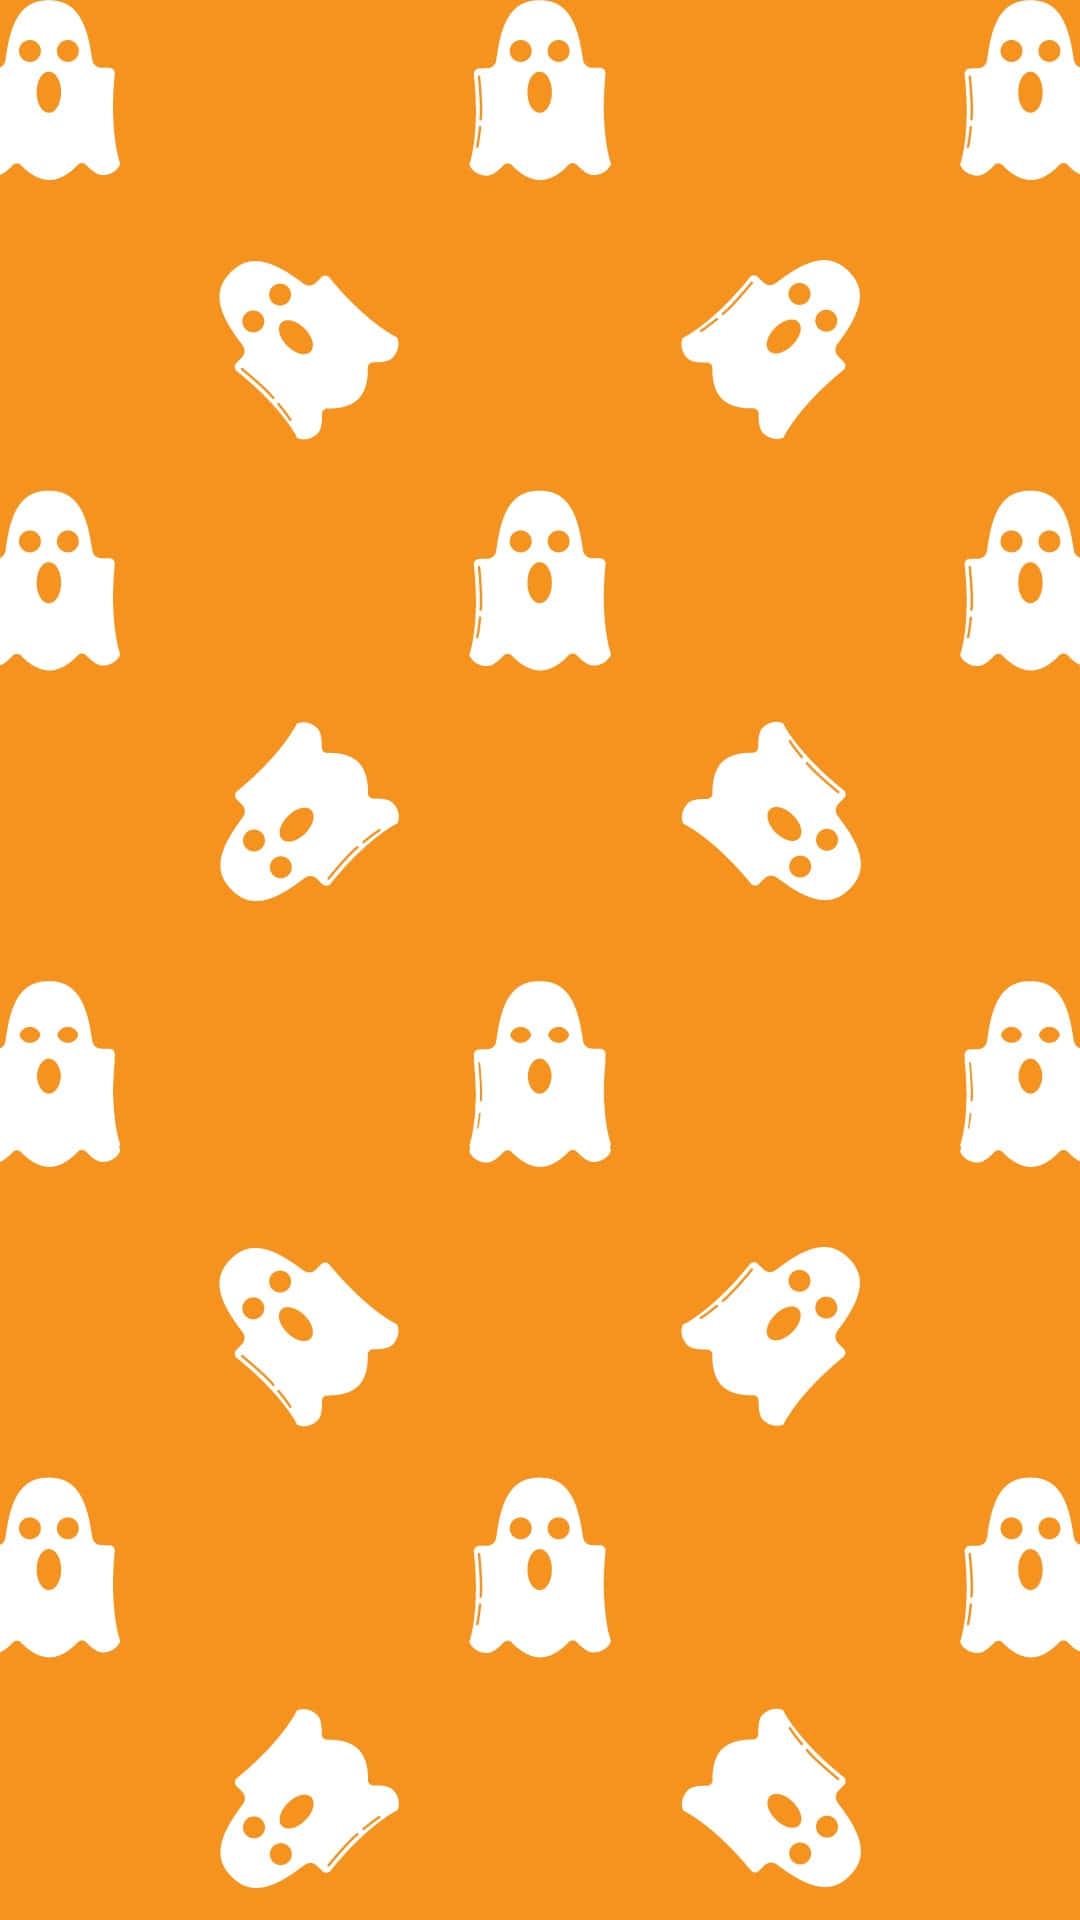 Get into the Halloween spirit with this spooky mobile phone background!